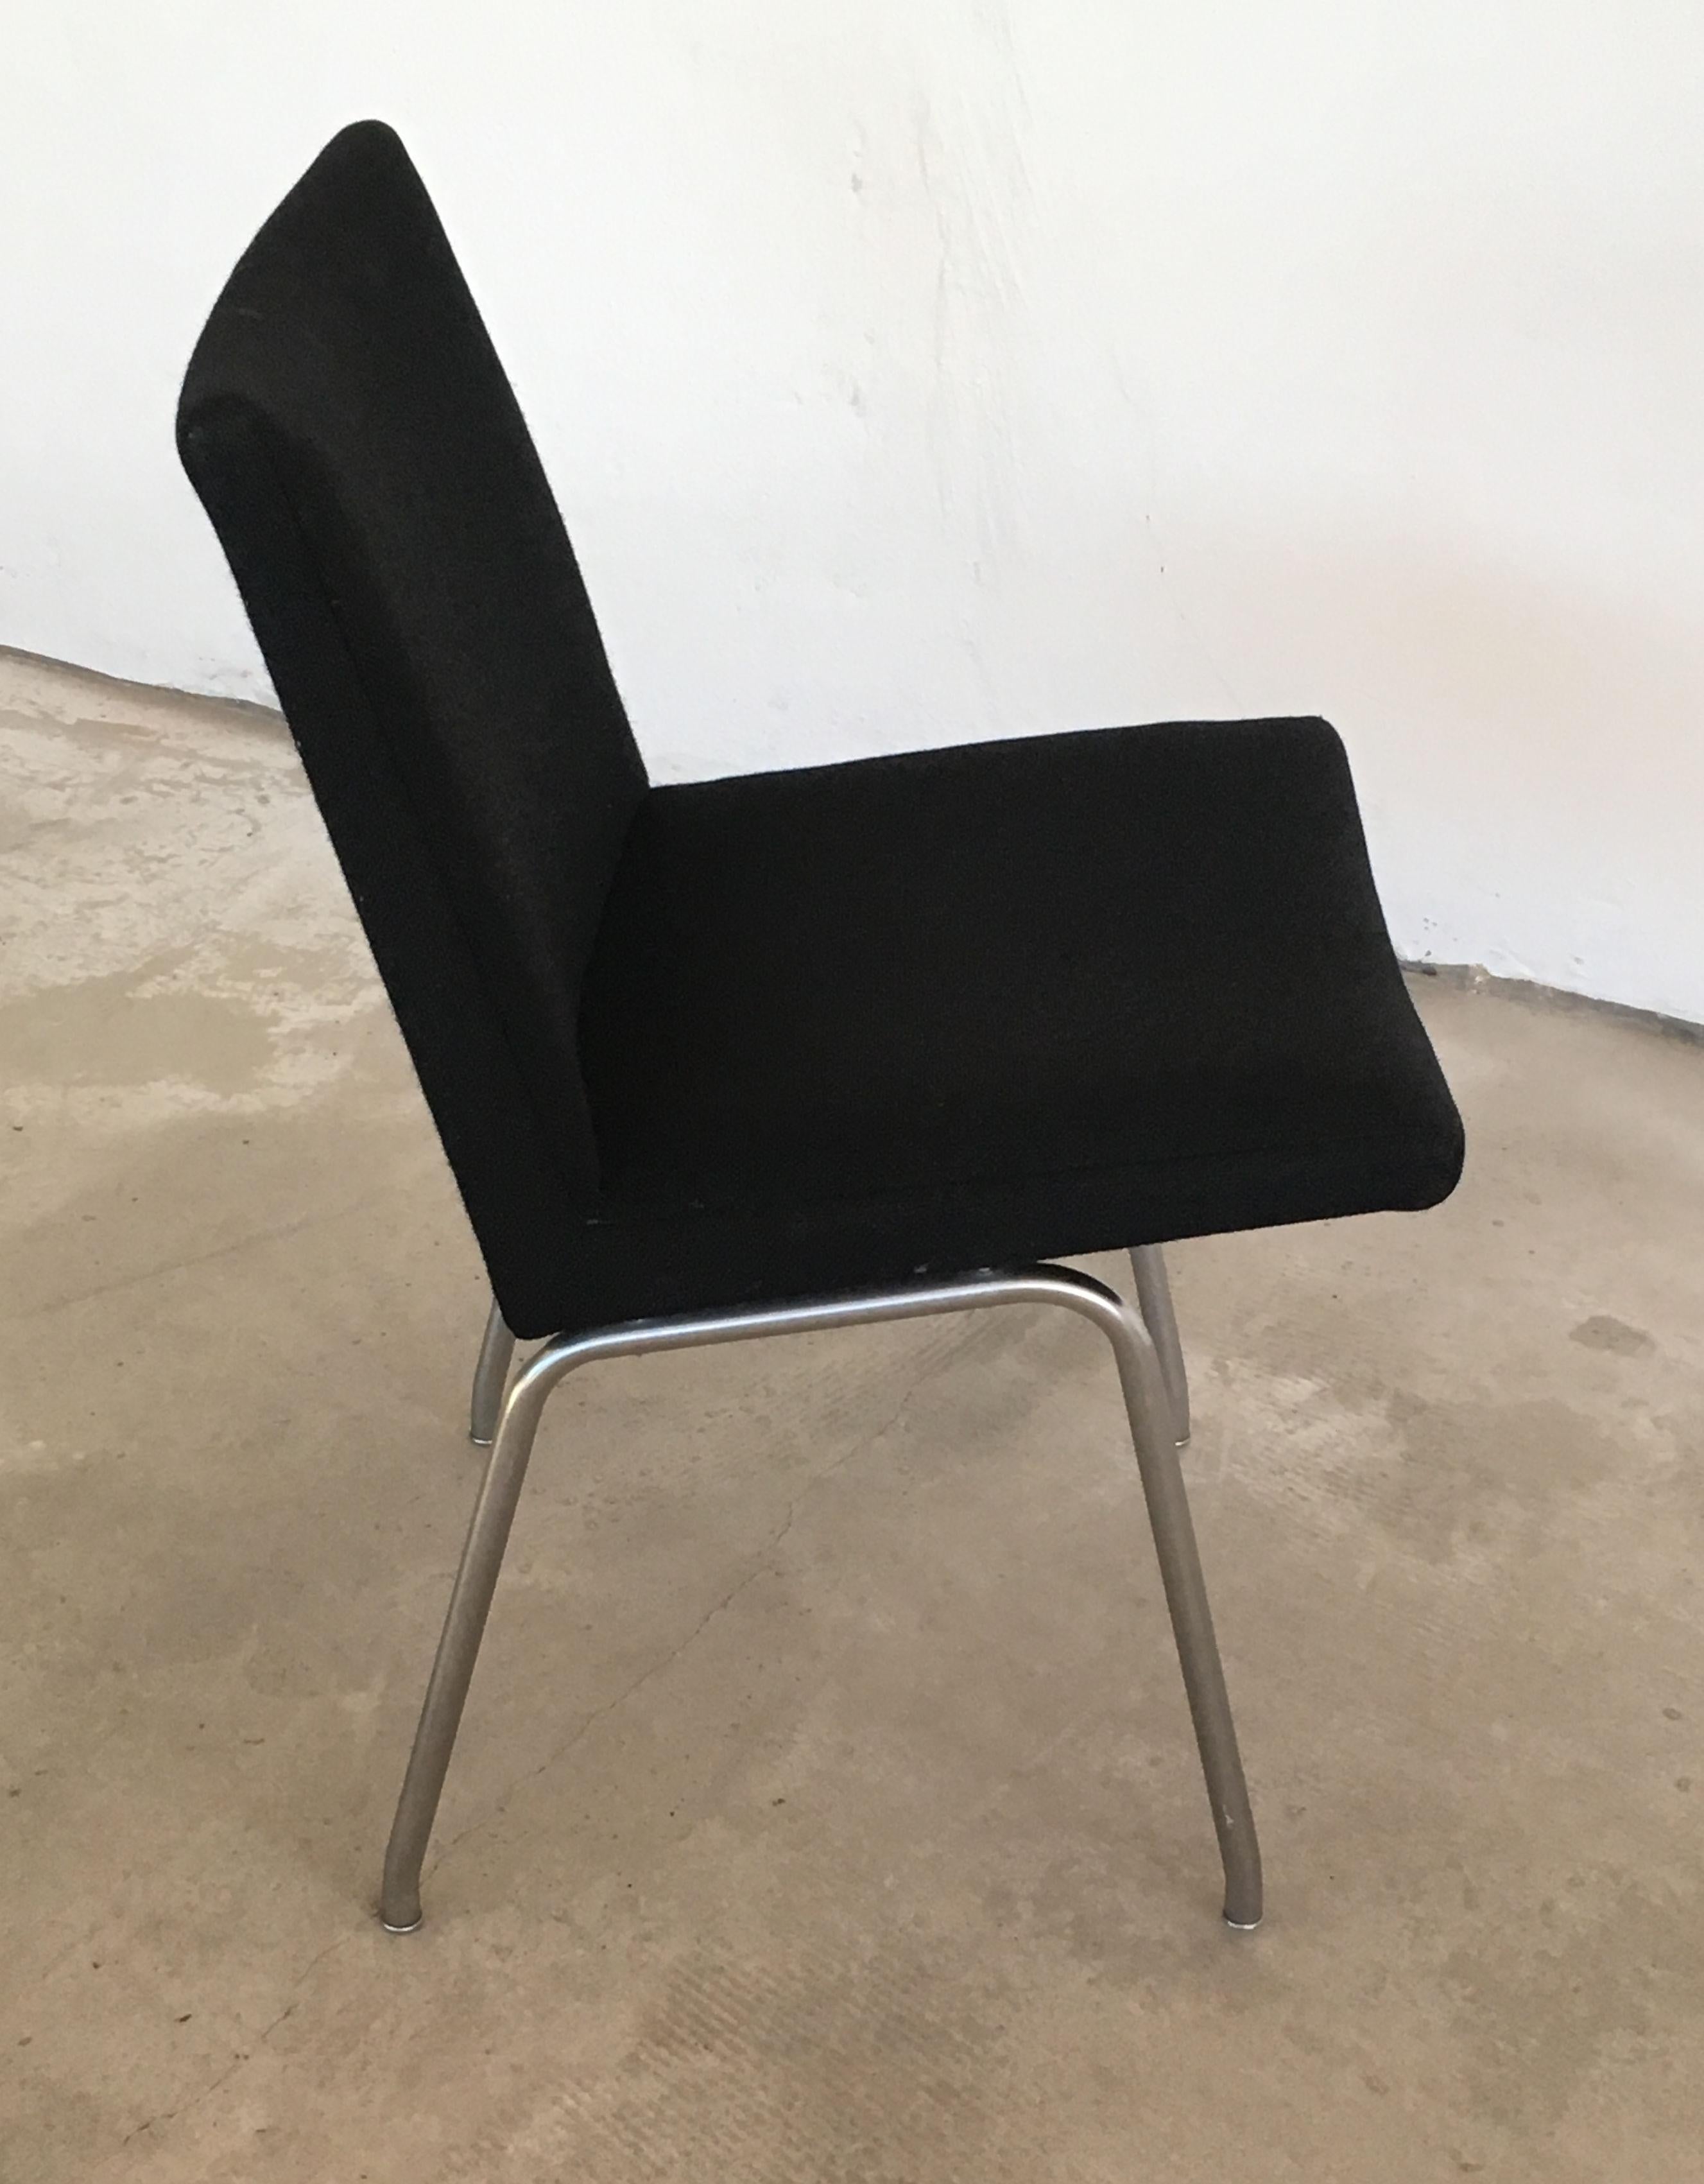 Hans J. Wegner Set of 10 Airport Chairs by A.P. Stolen Inc. Re-Upholstery For Sale 2